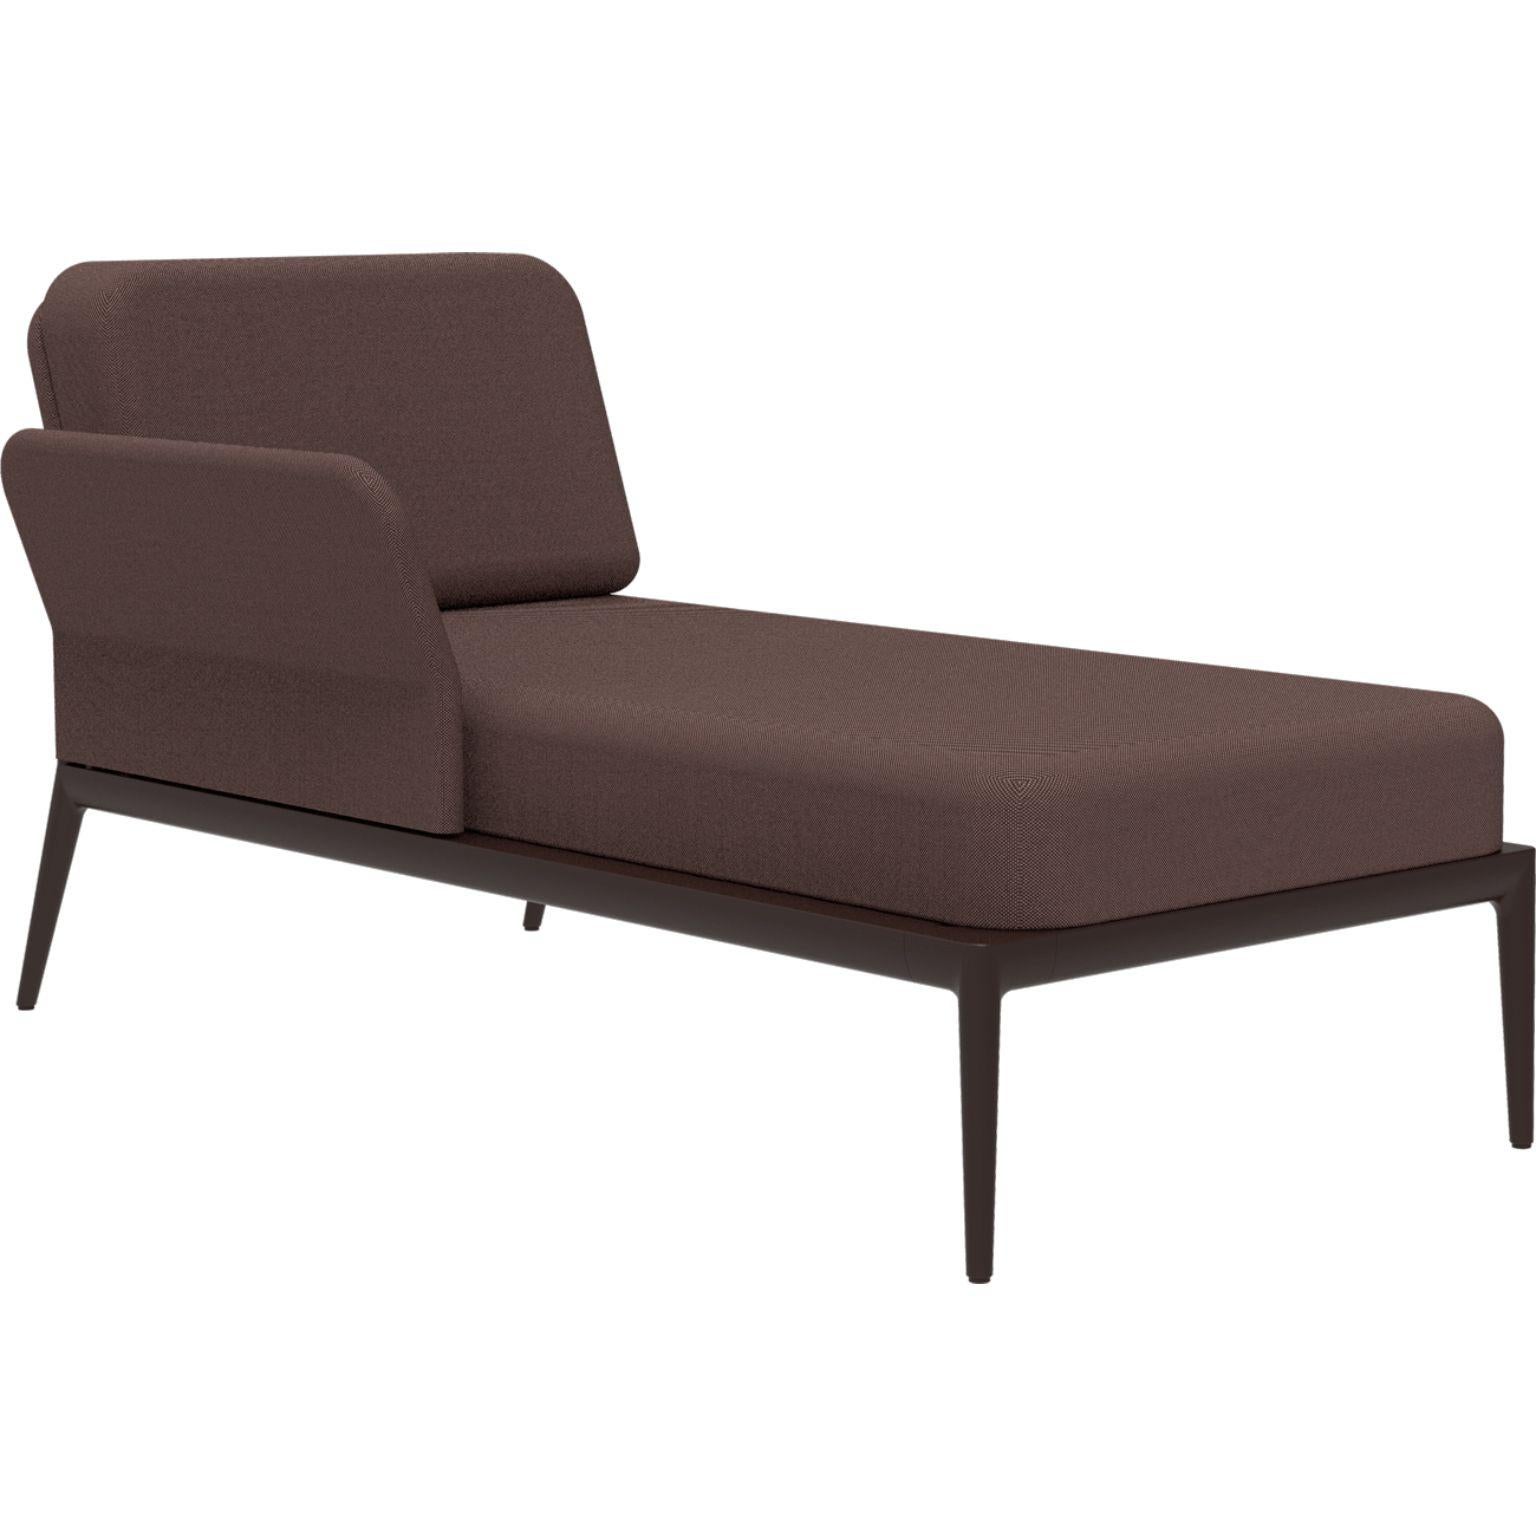 Cover Chocolate Right Chaise Longue by MOWEE
Dimensions: D 80 x W 155 x H 81 cm (seat height 42 cm).
Material: Aluminum and upholstery.
Weight: 28 kg.
Also available in different colors and finishes. Please contact us.

An unmistakable